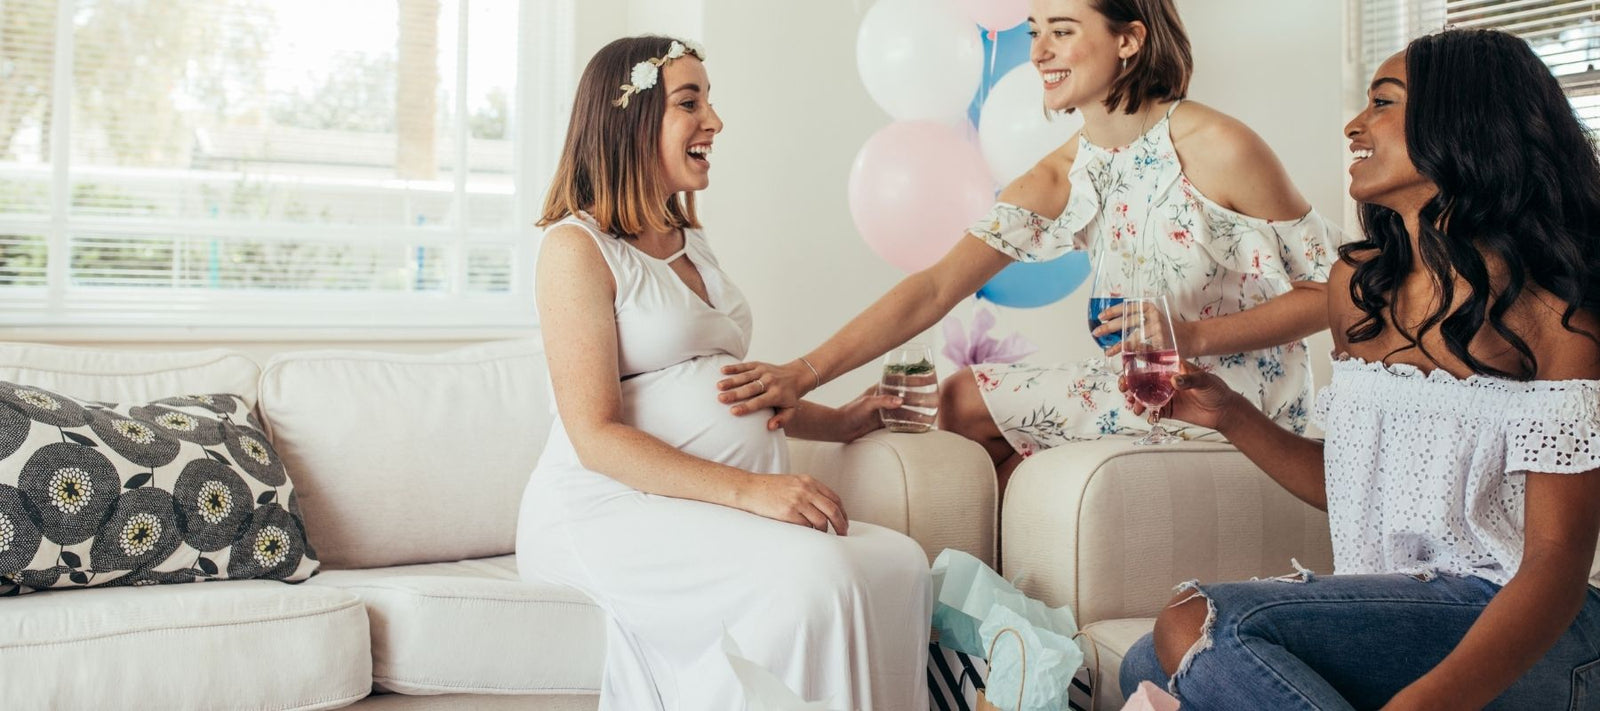 What to wear to a baby shower?